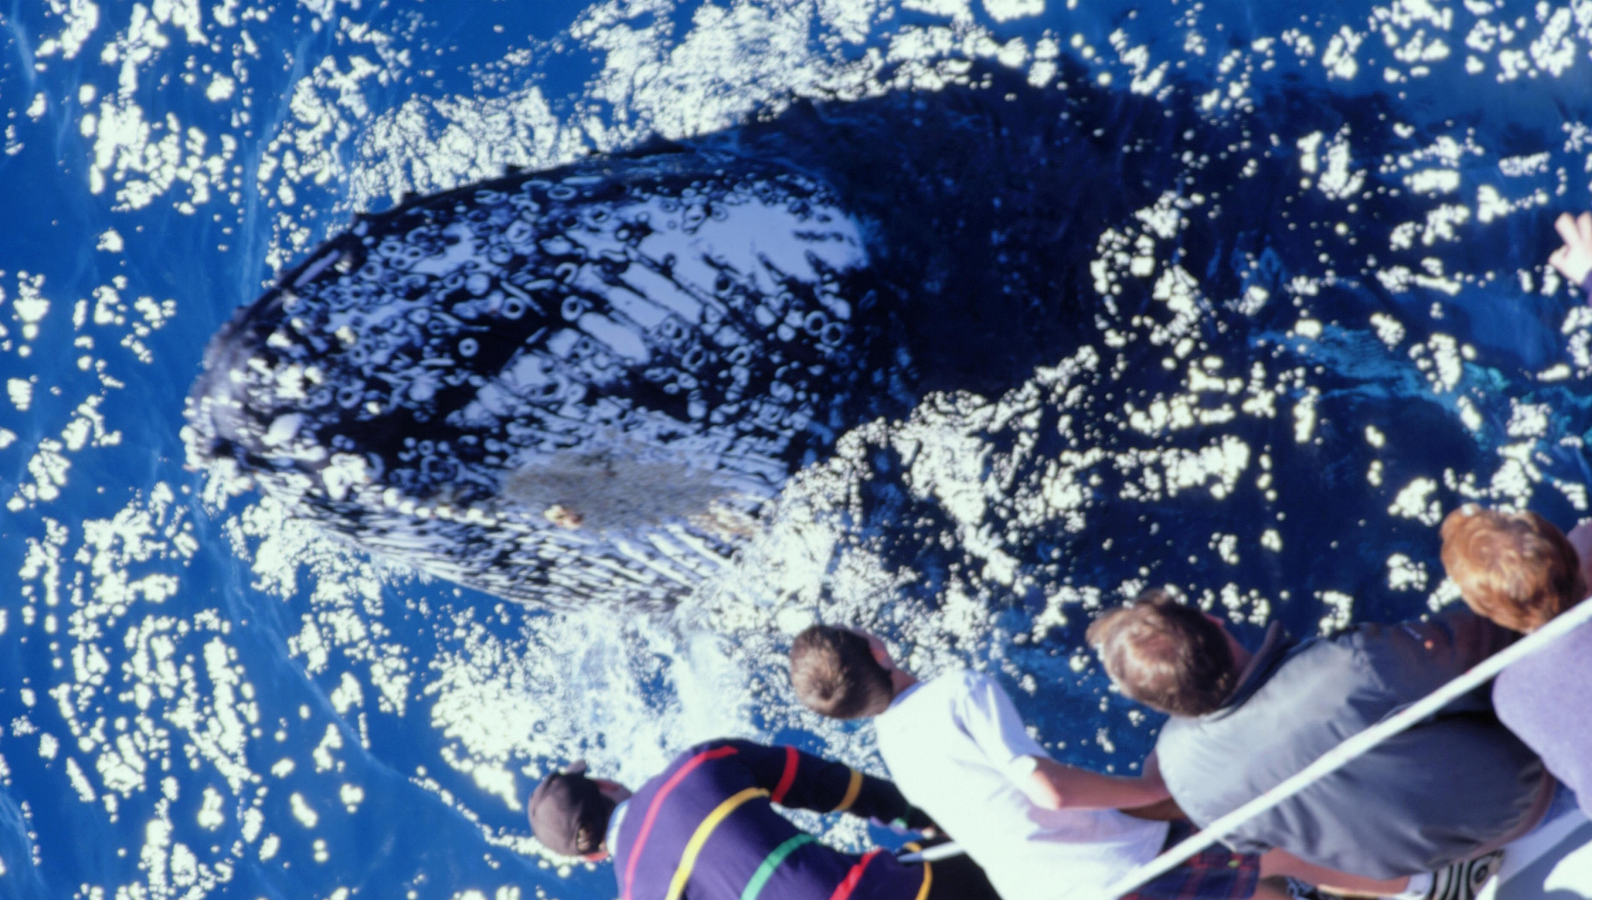 The fourth thing in the list of 10 best things to do in Norway - Go whale-watching at Andenes